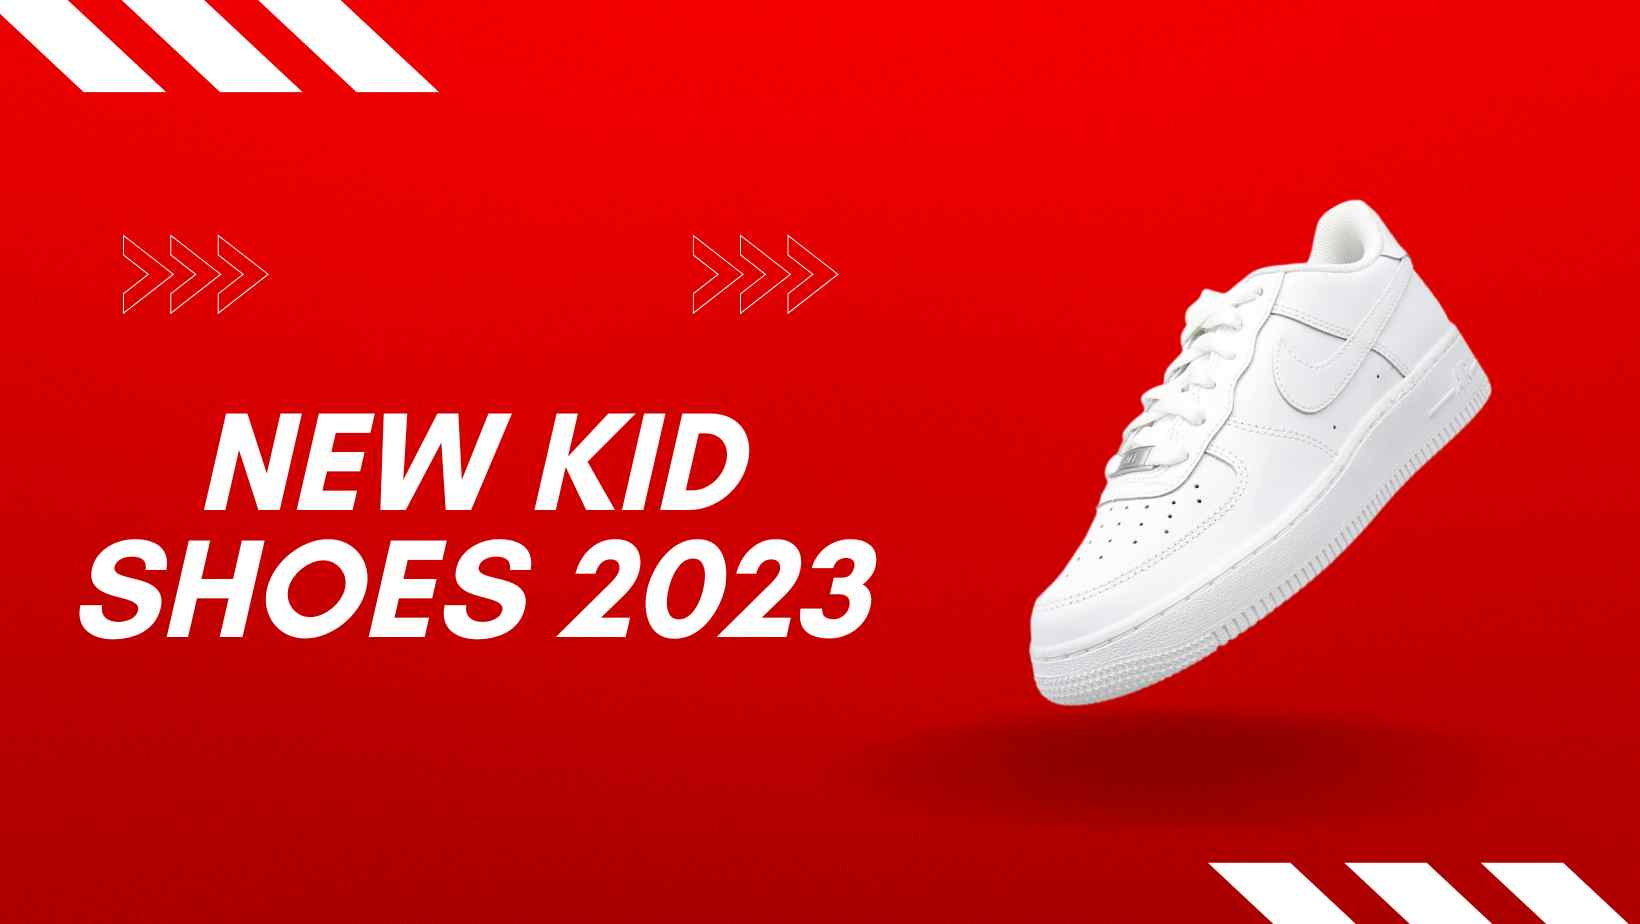 New Kid Shoes 2023: The Latest Trends and Best Picks for Your Little Ones